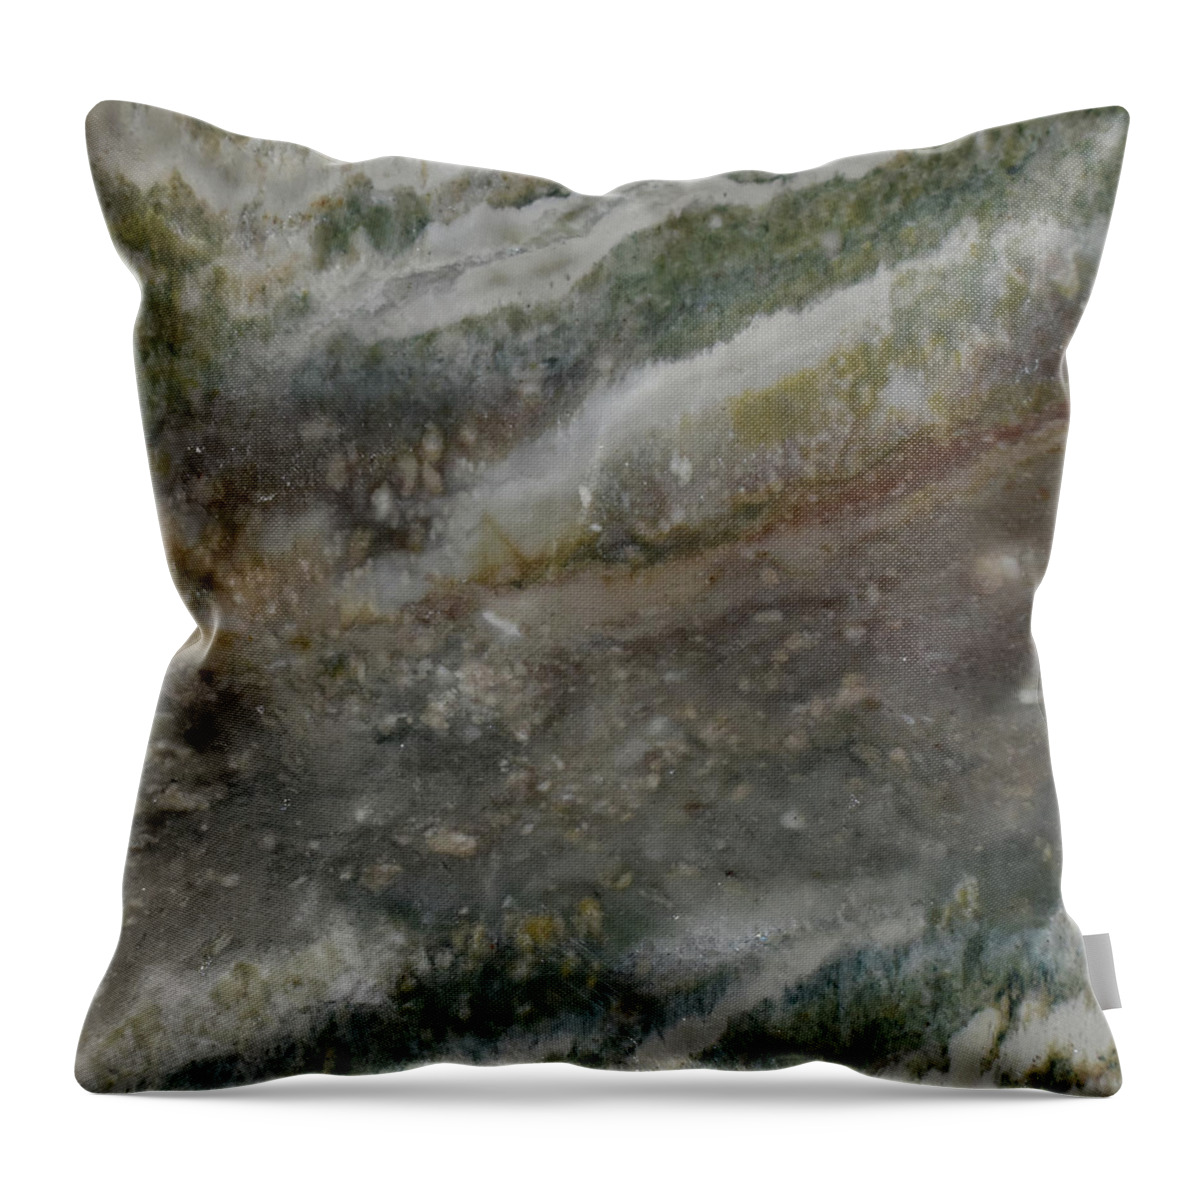  Throw Pillow featuring the photograph Mr1023d by Art in a Rock